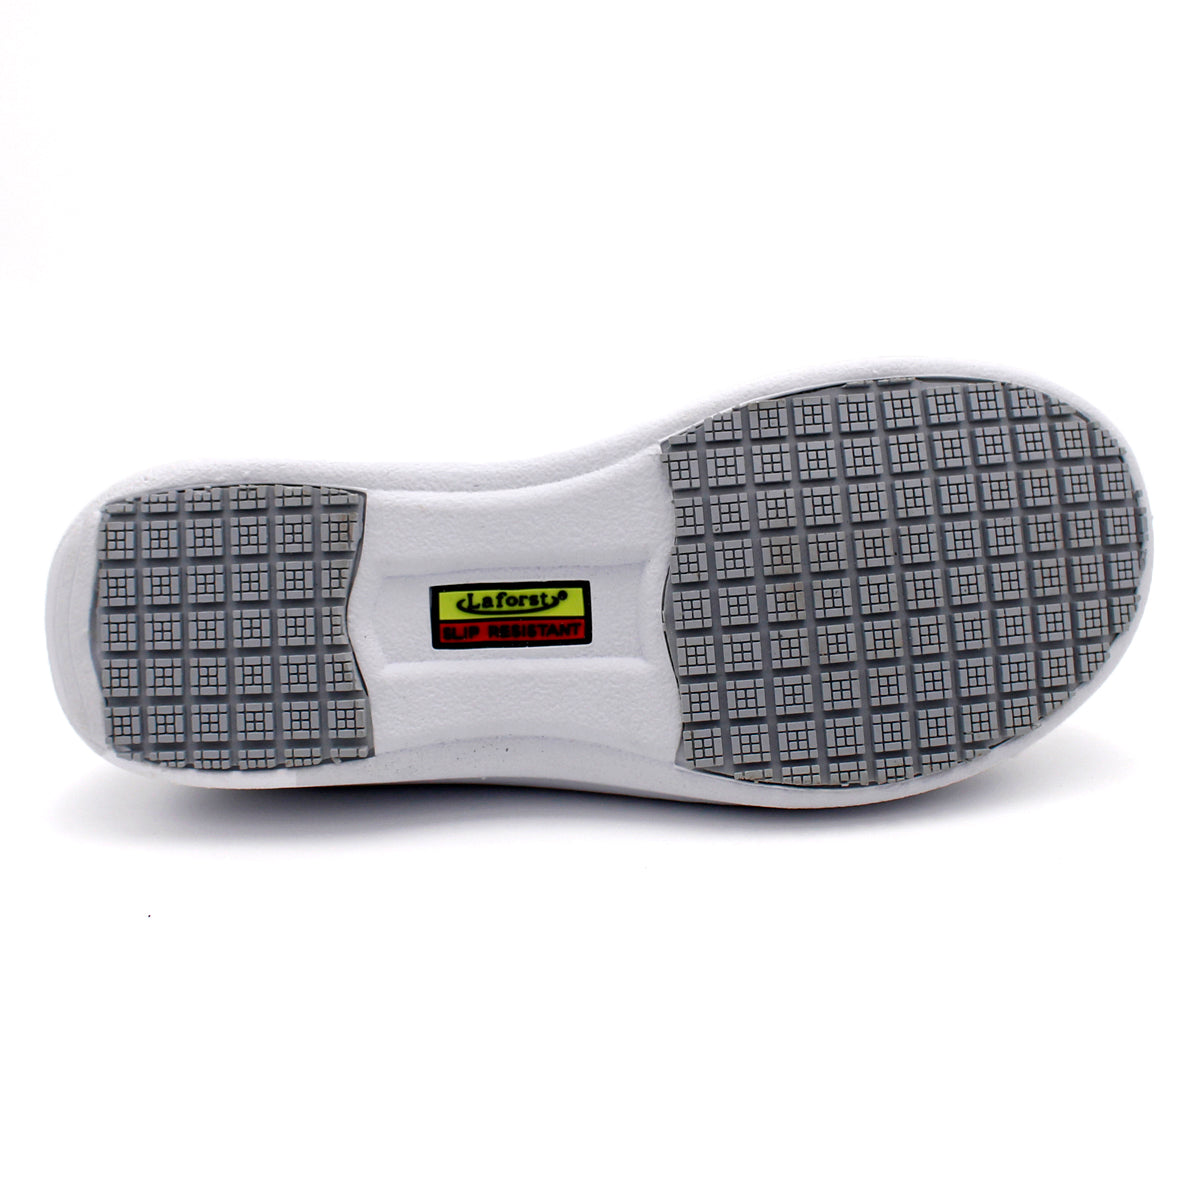 Gina 7820-02M / Composite Safety Toe